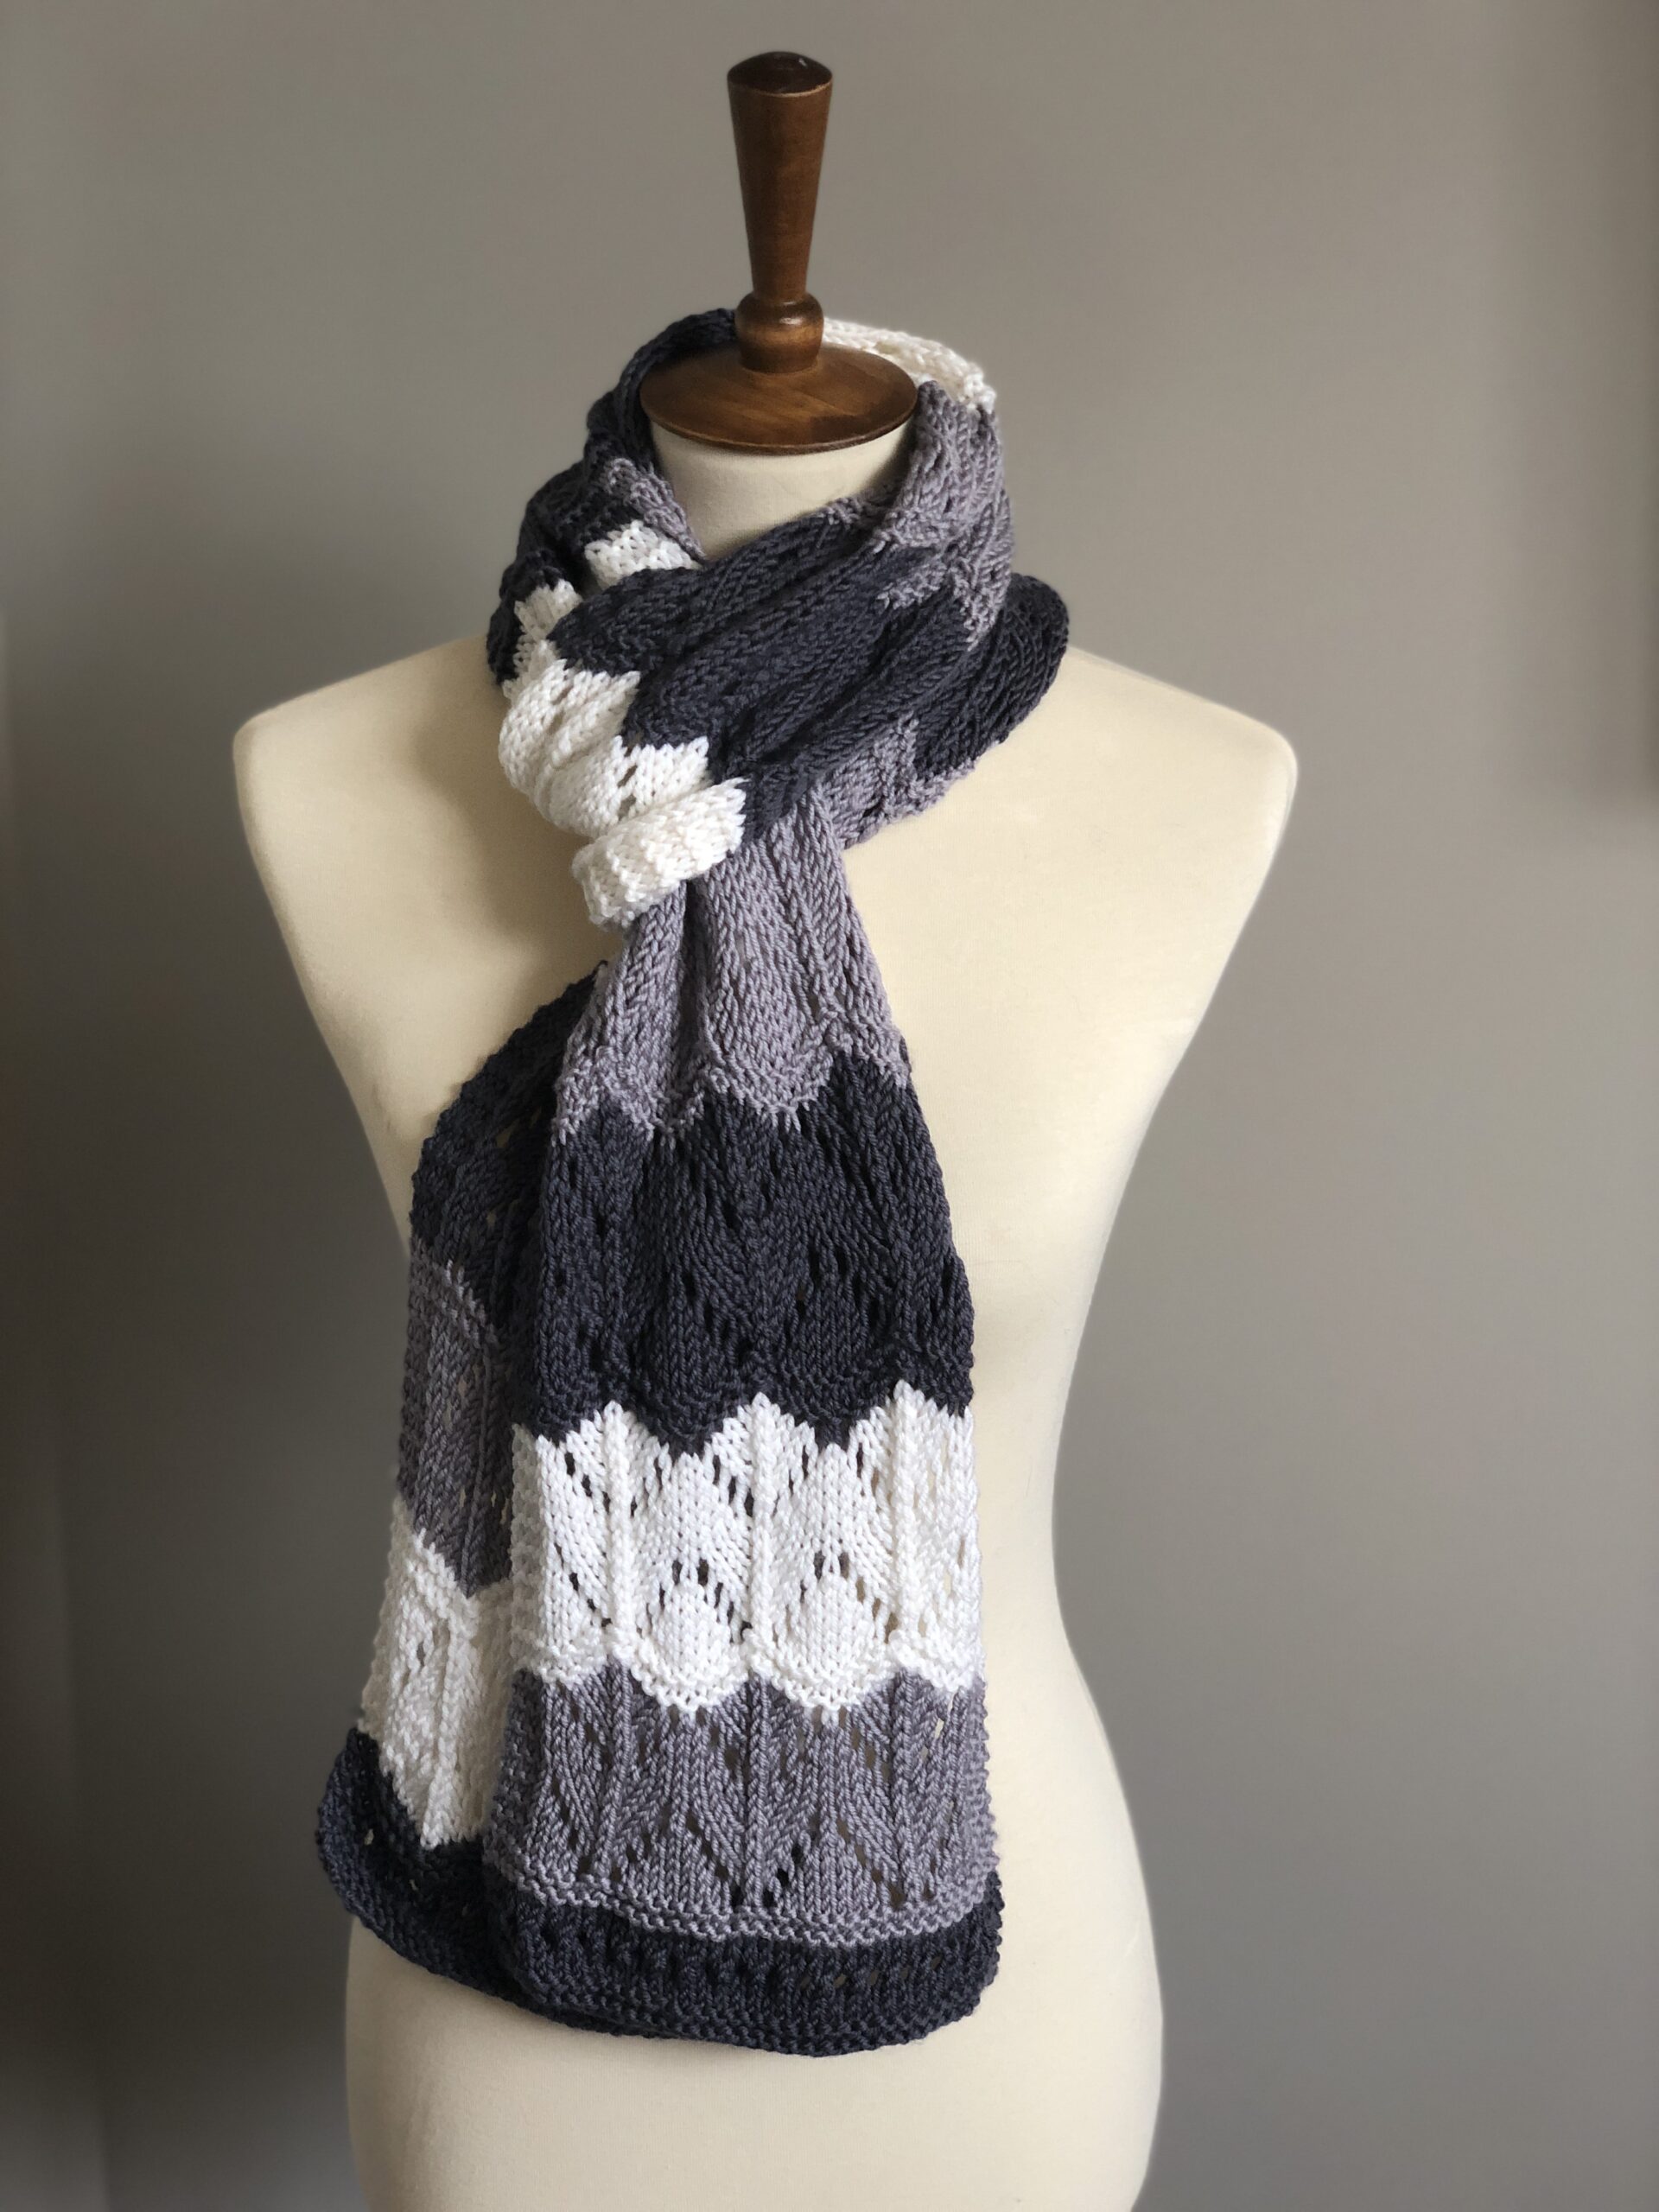 The image displays a mannequin adorned with a beautifully knitted scarf named "Greyson Waves Scarf". The scarf features a striking wave pattern in shades of navy, grey, and white, creating a sophisticated, gradient-like effect. The pattern showcases intricate stitches that give the piece a textured, three-dimensional look. The scarf is elegantly draped around the mannequin's neck, emphasizing its length and the fluidity of the design, reminiscent of the ebb and flow of ocean waves. The color palette and knitting technique suggest a modern twist on classic knitwear, making it a versatile addition to any wardrobe. The overall presentation of the scarf is polished and stylish, indicating a design by Marly Bird, known for chic and contemporary knit patterns.